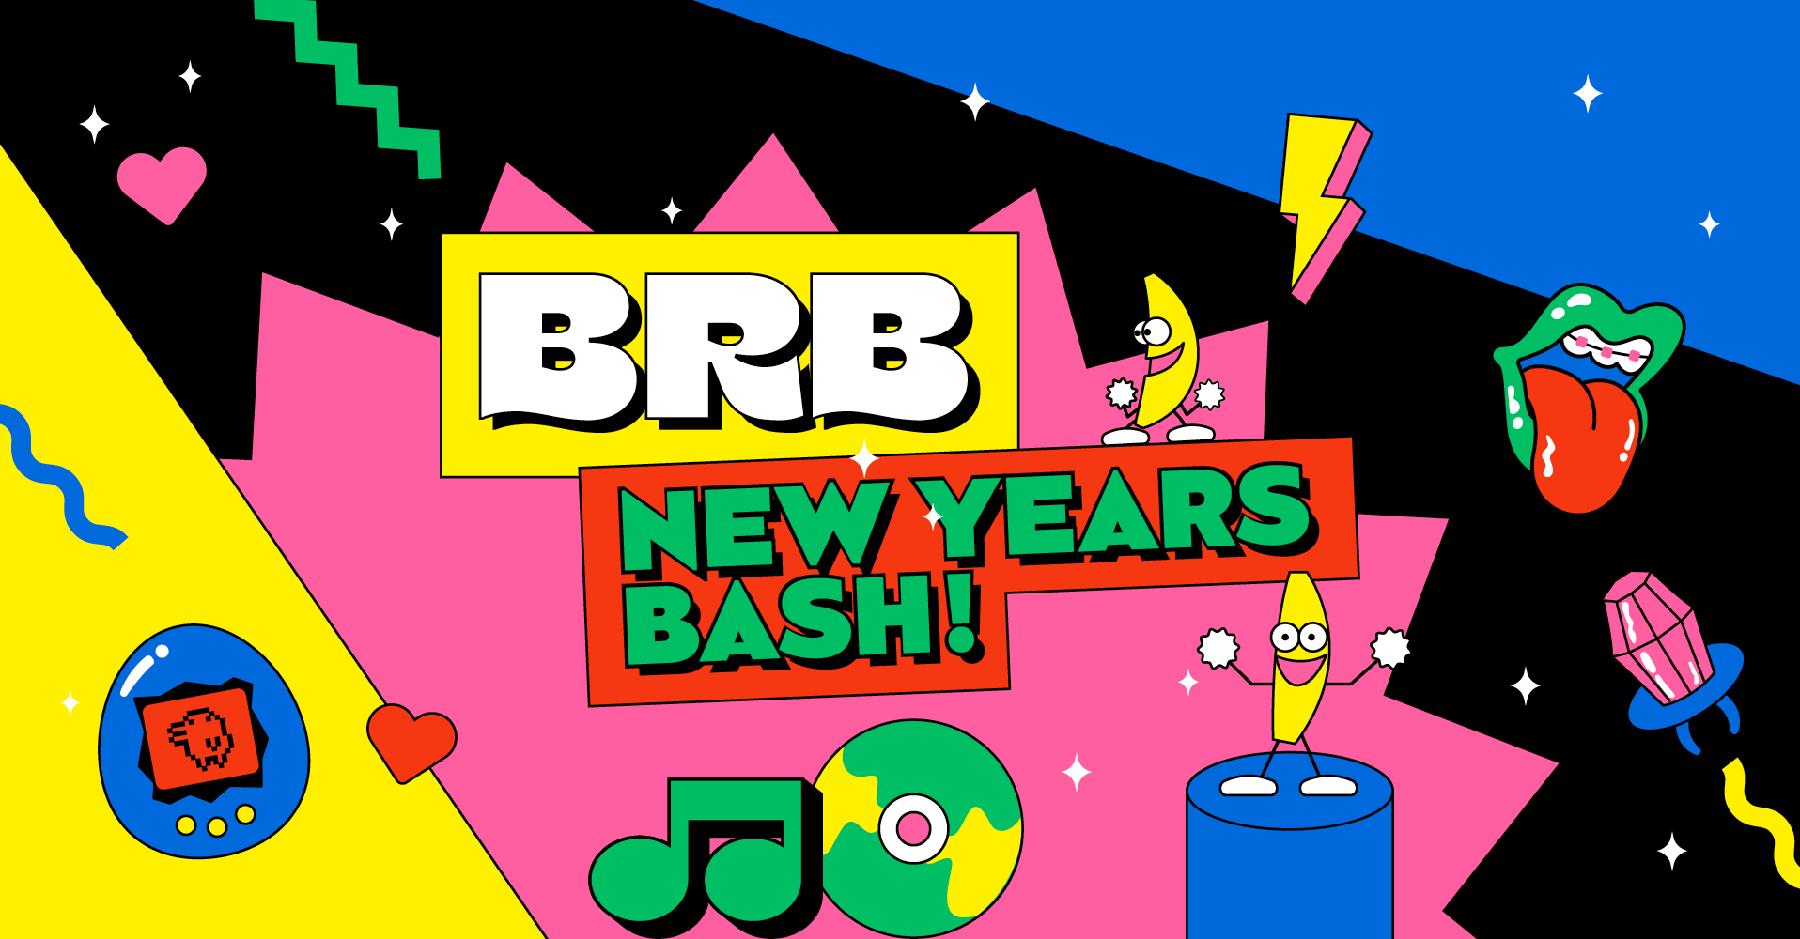 BRB – New Years Bash!